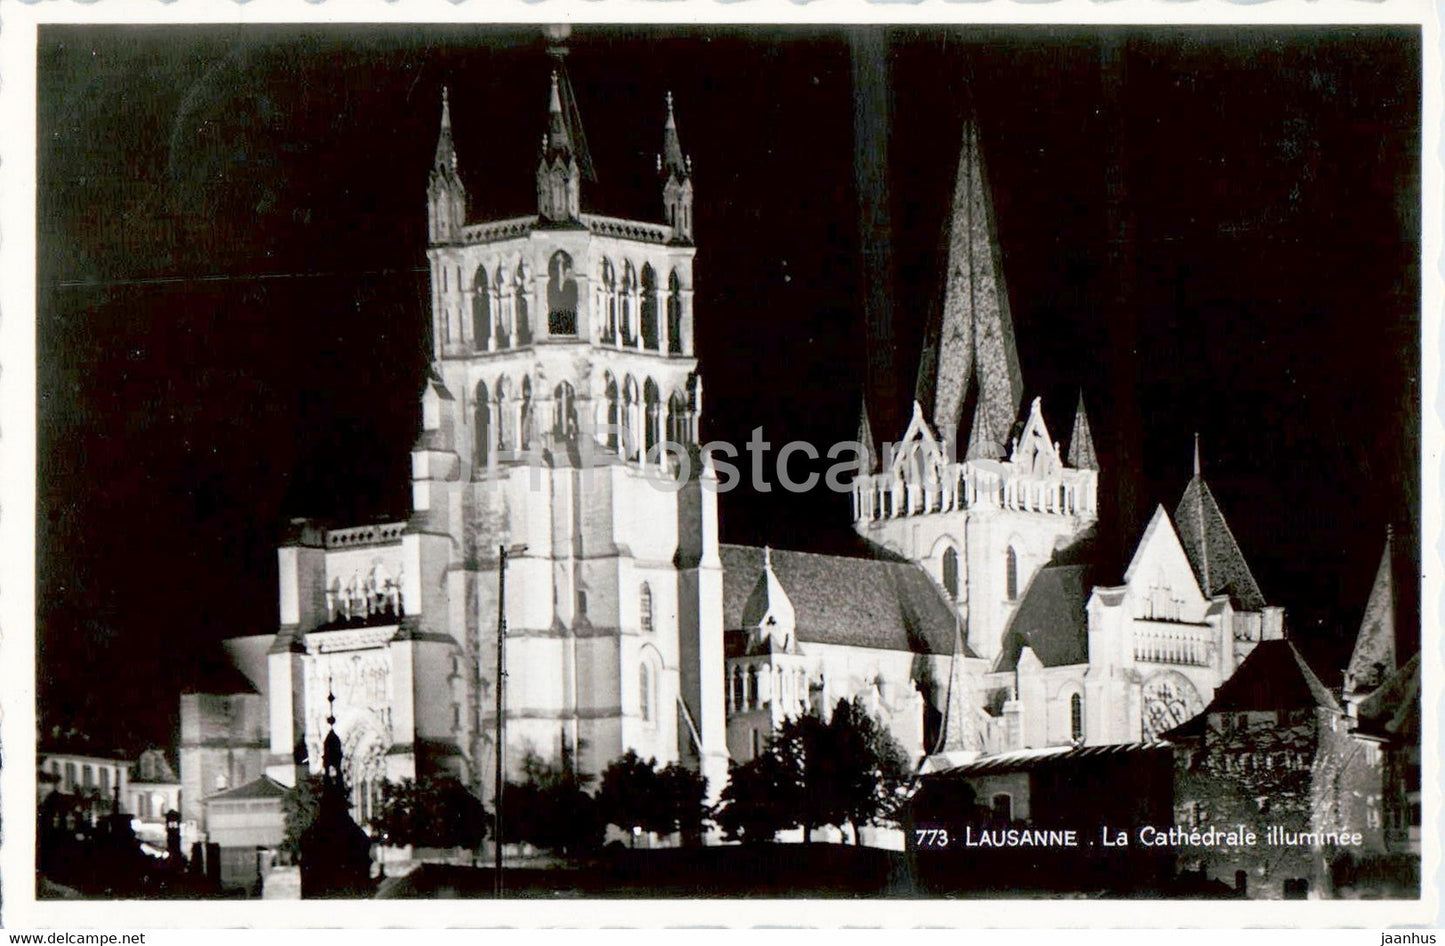 Lausanne - La Cathedrale illuminee - cathedral - 773 - 1947 - old postcard - Switzerland - used - JH Postcards